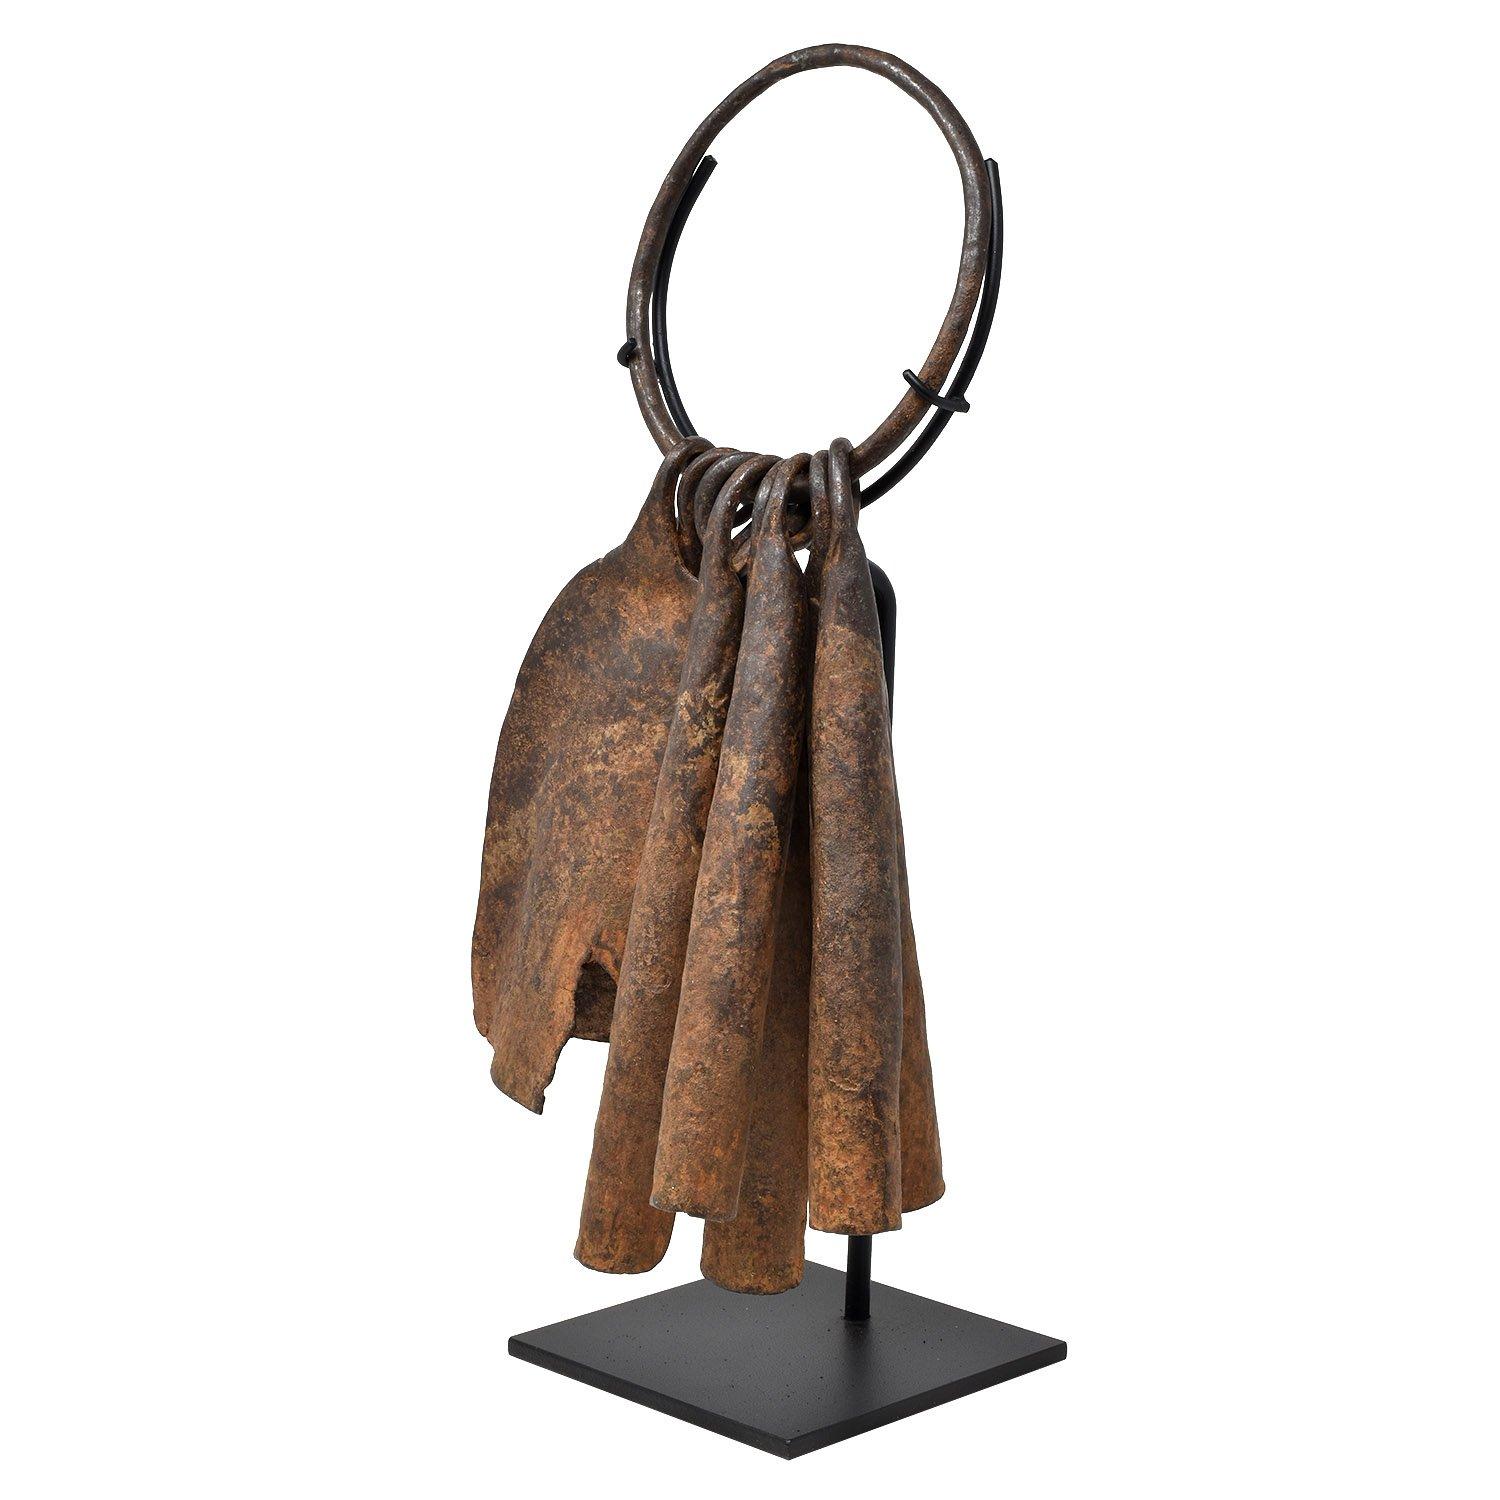 Chamba, Nigeria, Africa

Iron

Early 20th century

14.5 x 7 in. / 37 x 18 cm

Height on custom display stand: 16.5 in. / 42 cm

Various models of these original currency bearers were manufactured by the Chamba tribe. The bearing iron can have an